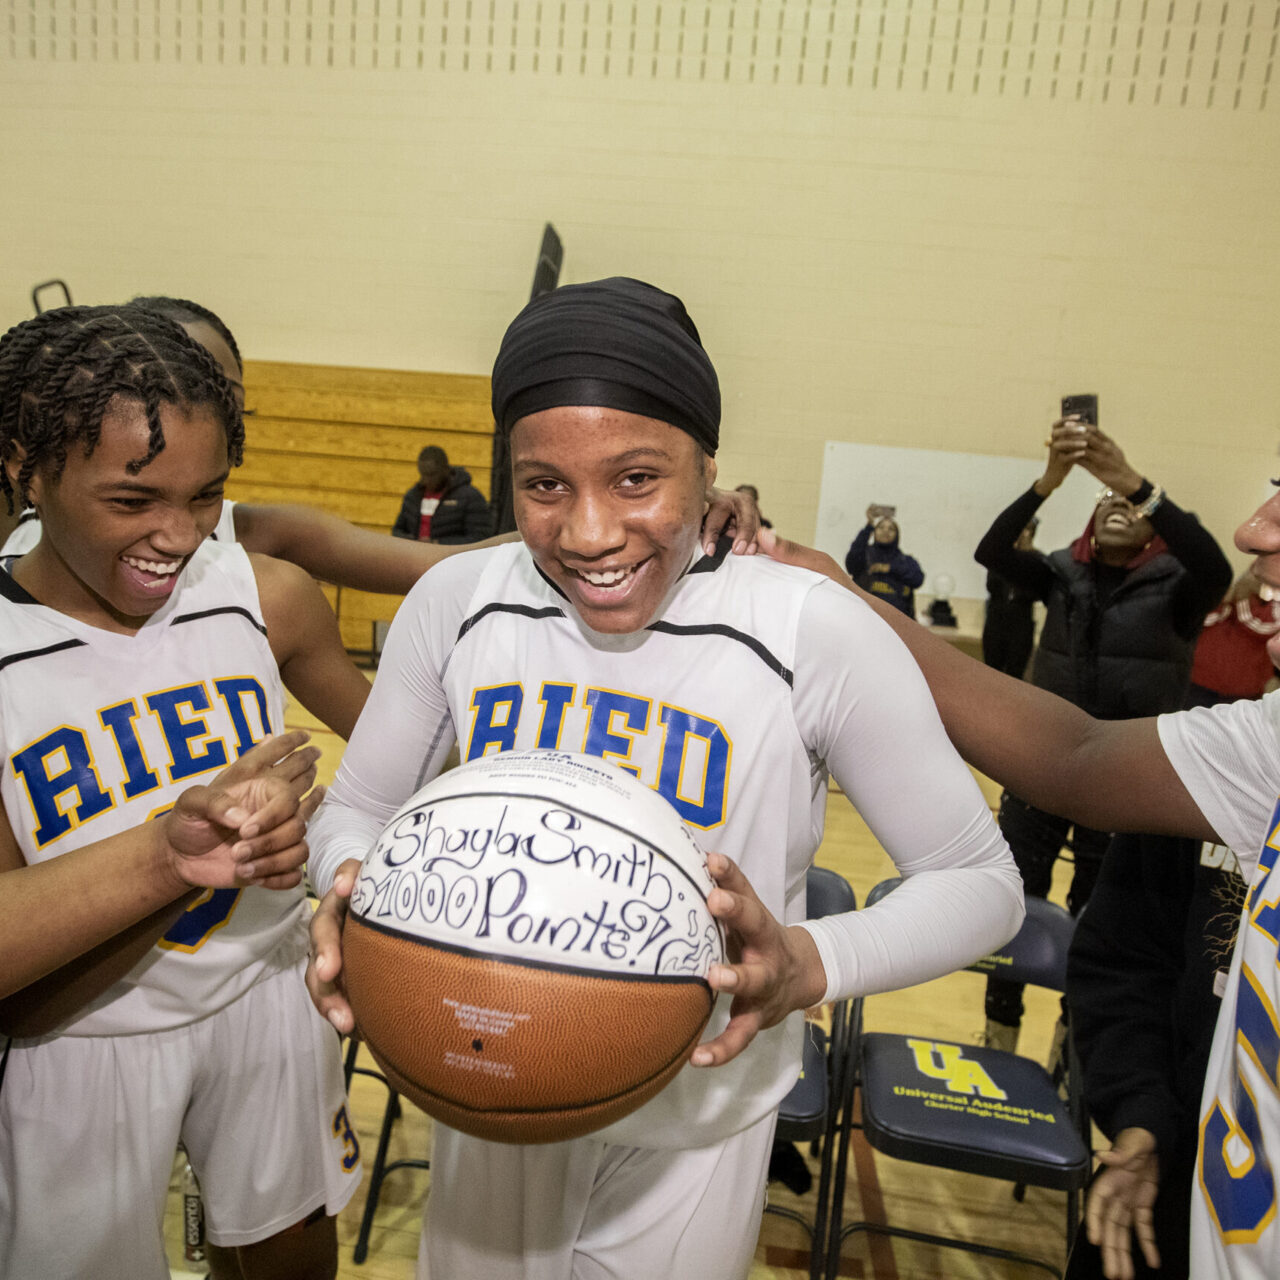 Shayla Smith of Universal Audenried is a dynamic sophomore guard and named the girls Philadelphia Public League player of the year. The sophomore became the fastest girl to score 1,000 points in the public league. Her teammates congratulate her after she went over 1,000 points in a playoff game against Masterman on Feb. 17, 2023.